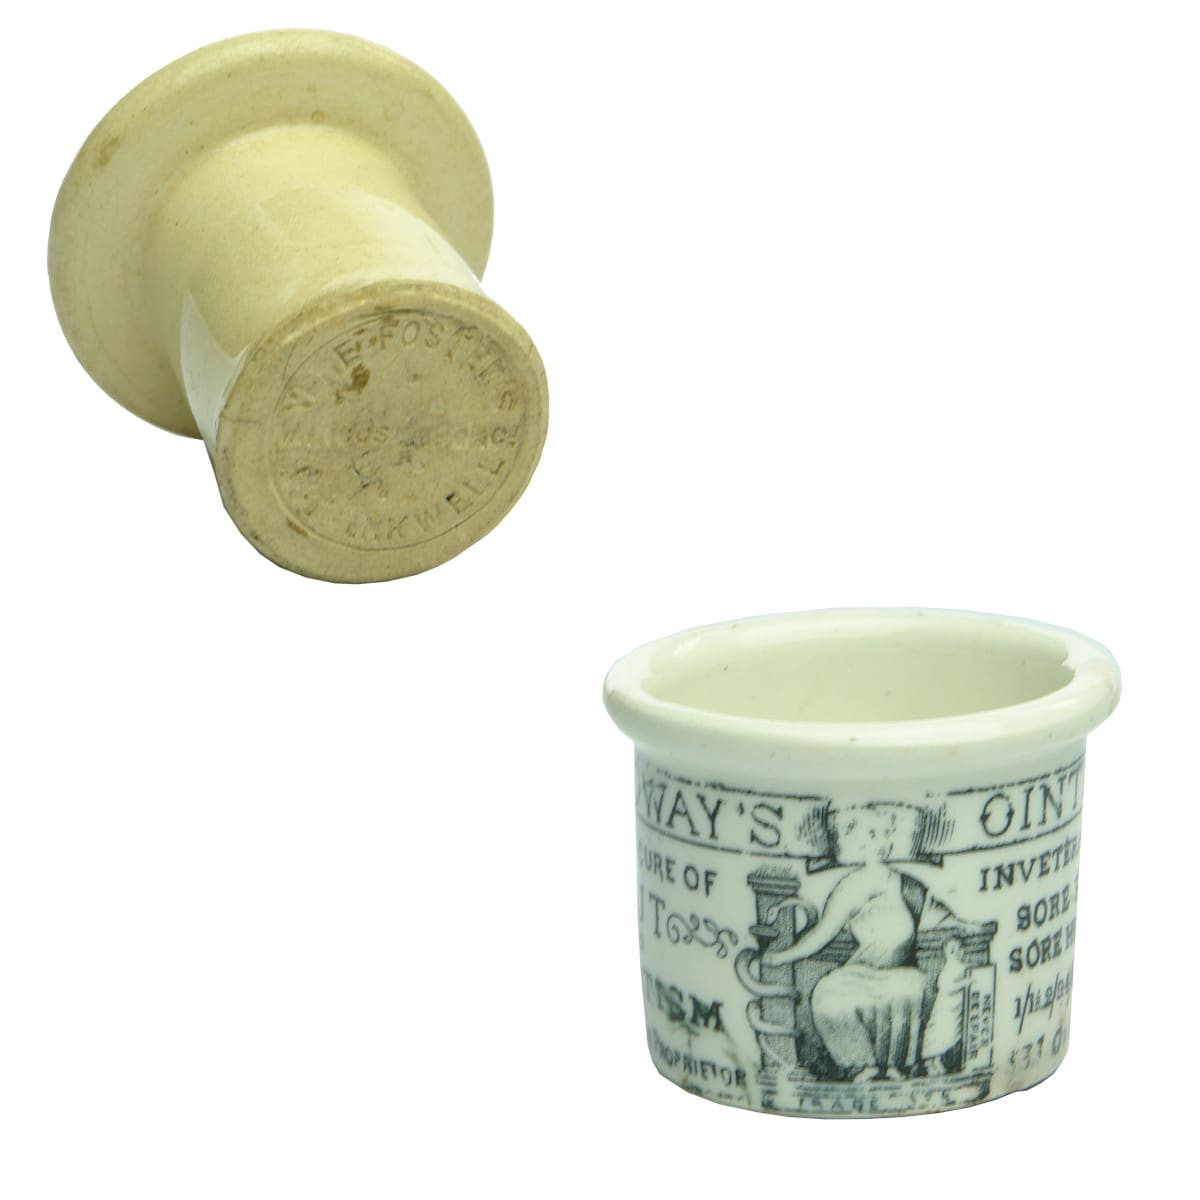 Pair of Ceramic Items: Vere Foster's Hat Inkwell and Holloways Ointment Pot.